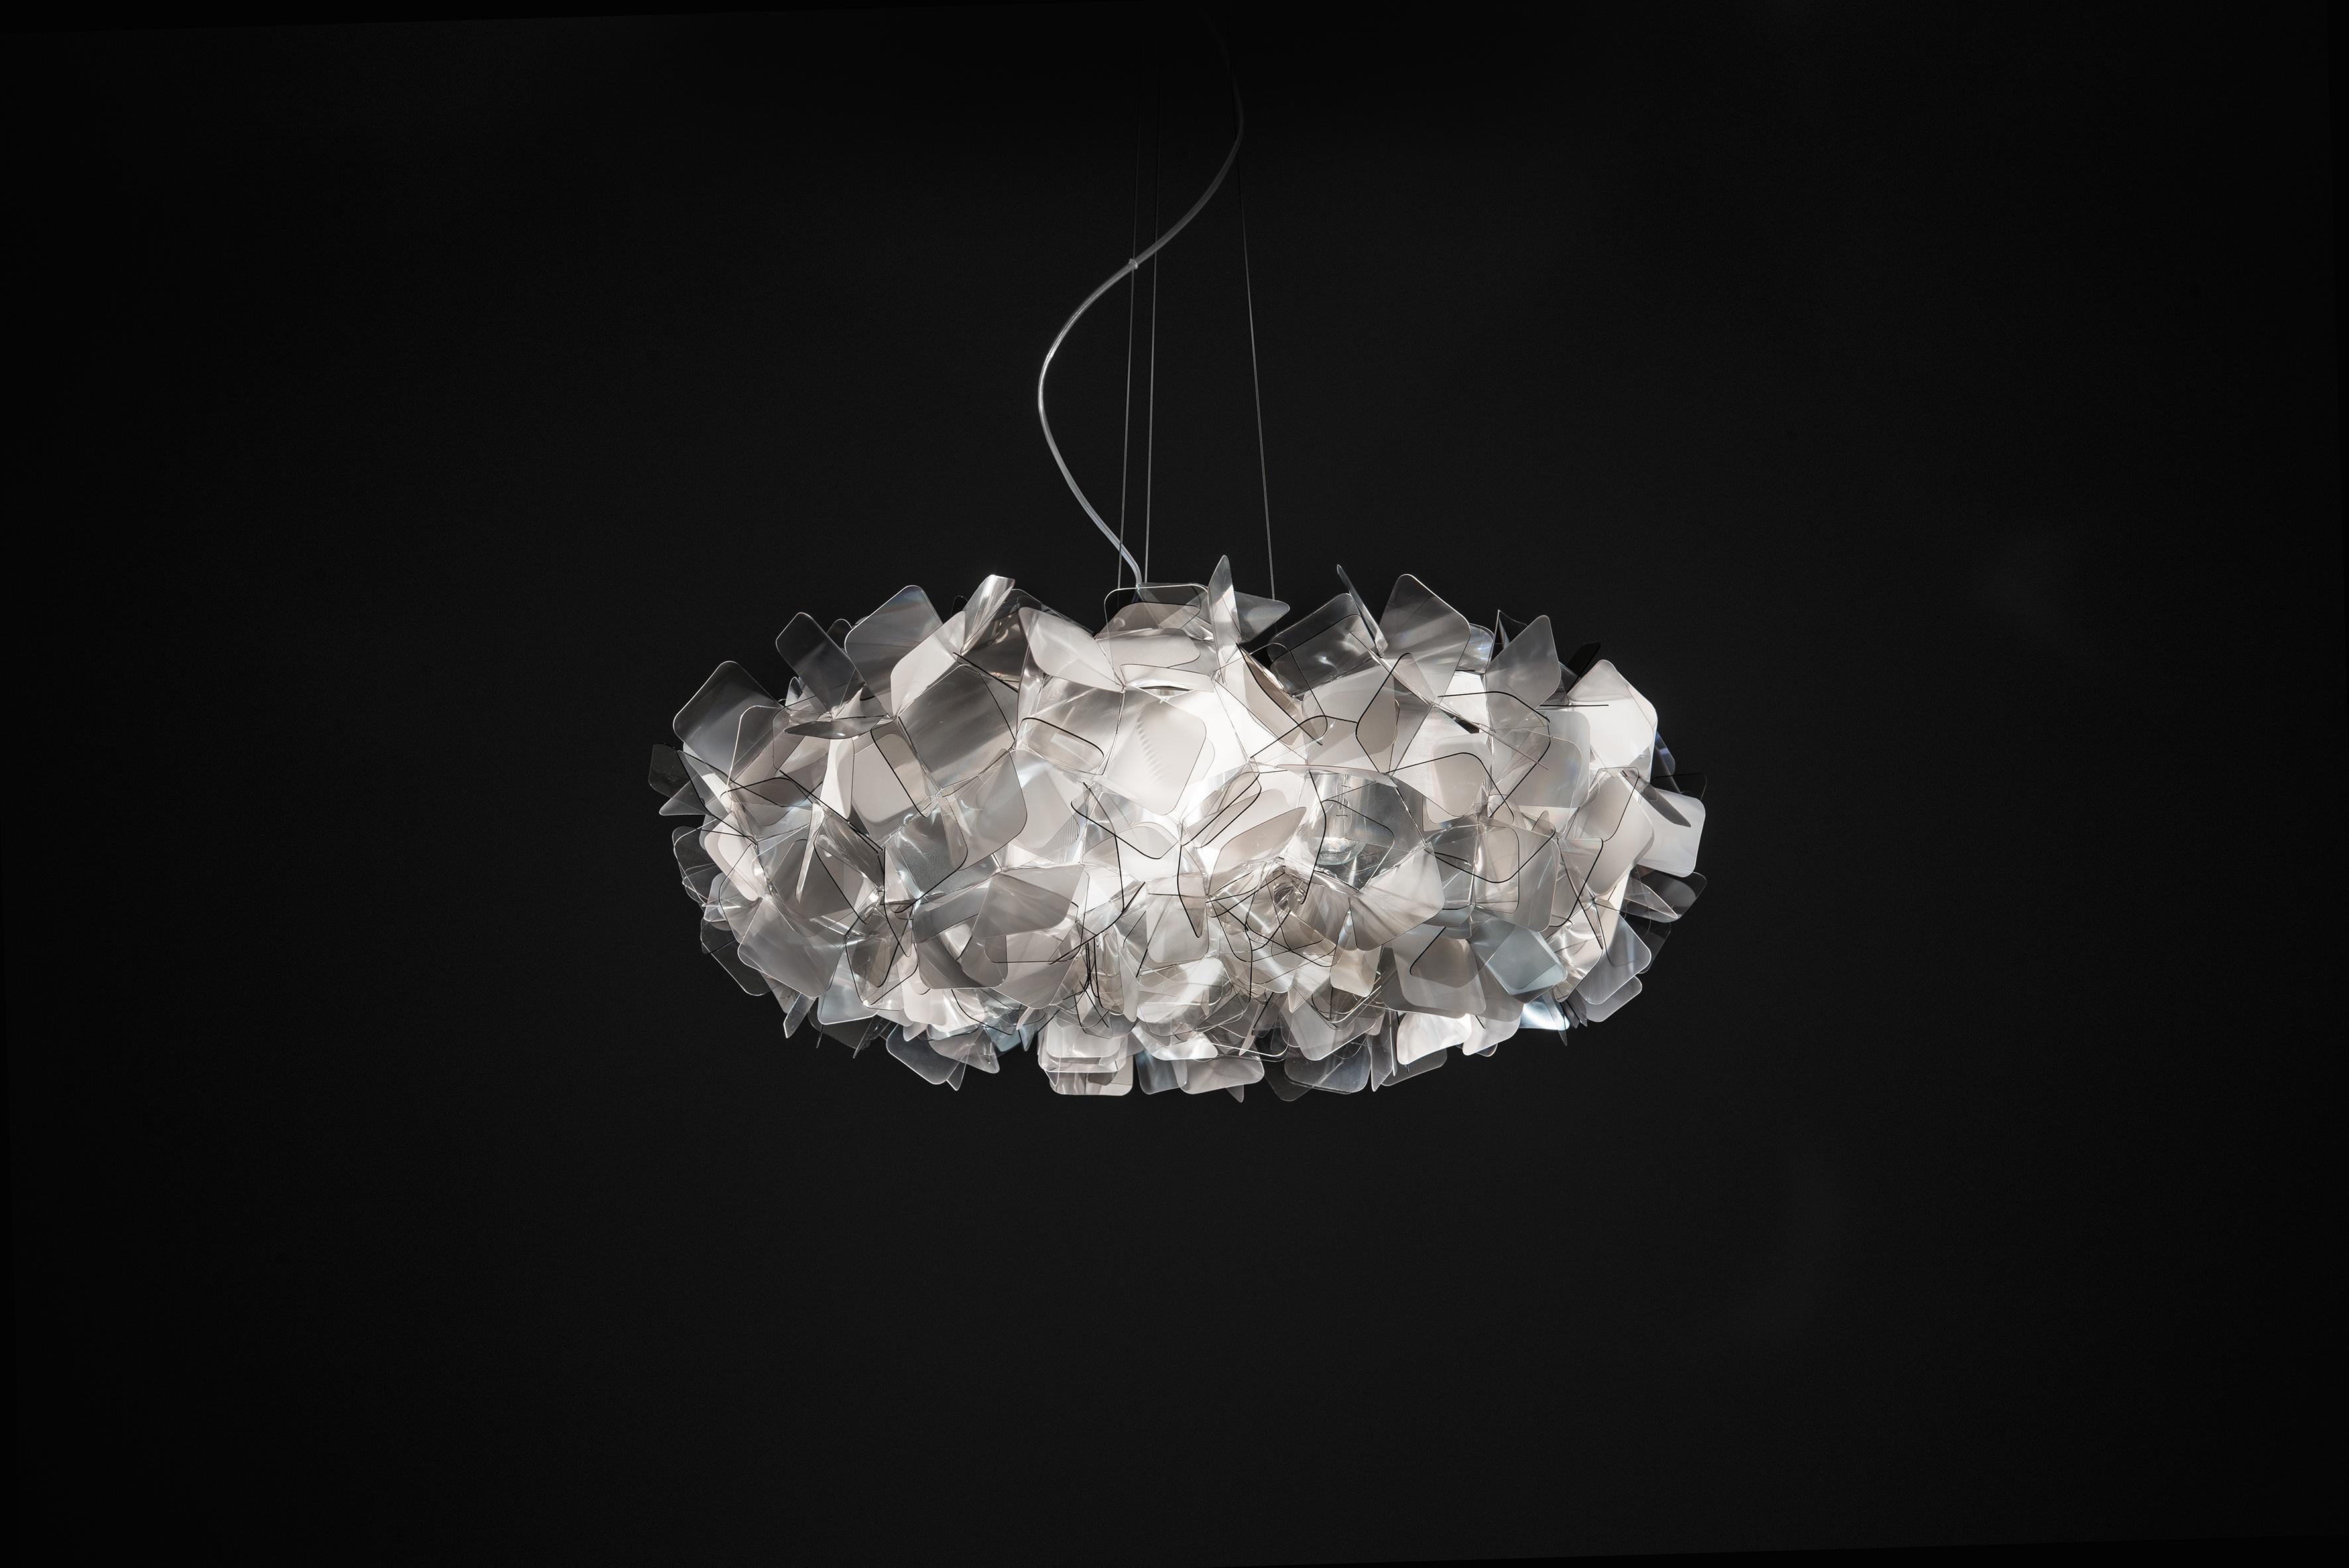 Clizia is a series of shapes fit together to create a perfect balance of reflections and transparencies. The lamp has taken note of natural forms, resembling a cloud that captures the first changing rays of morning sun, or a treetop filtering a play